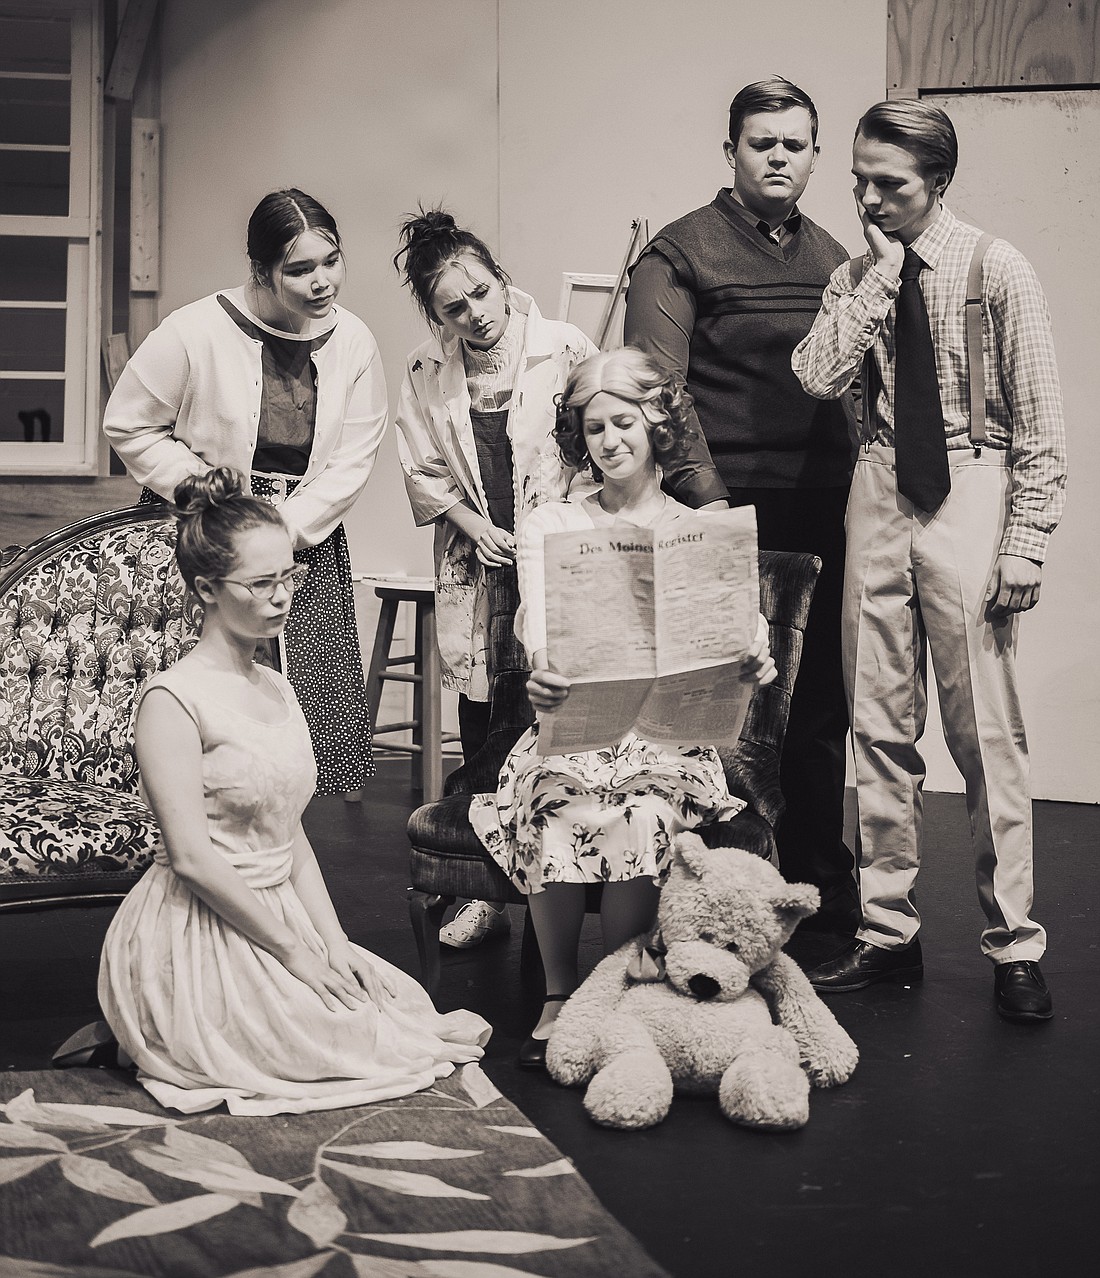 John Patrick's charming comedy “The Curious Savage” can be seen Oct. 13, 15, 21 and 22 at Lynden Christian High School. The play focuses on a woman who inherits a small fortune when her husband passes away — causing her stepchildren to commit her to a sanitarium.